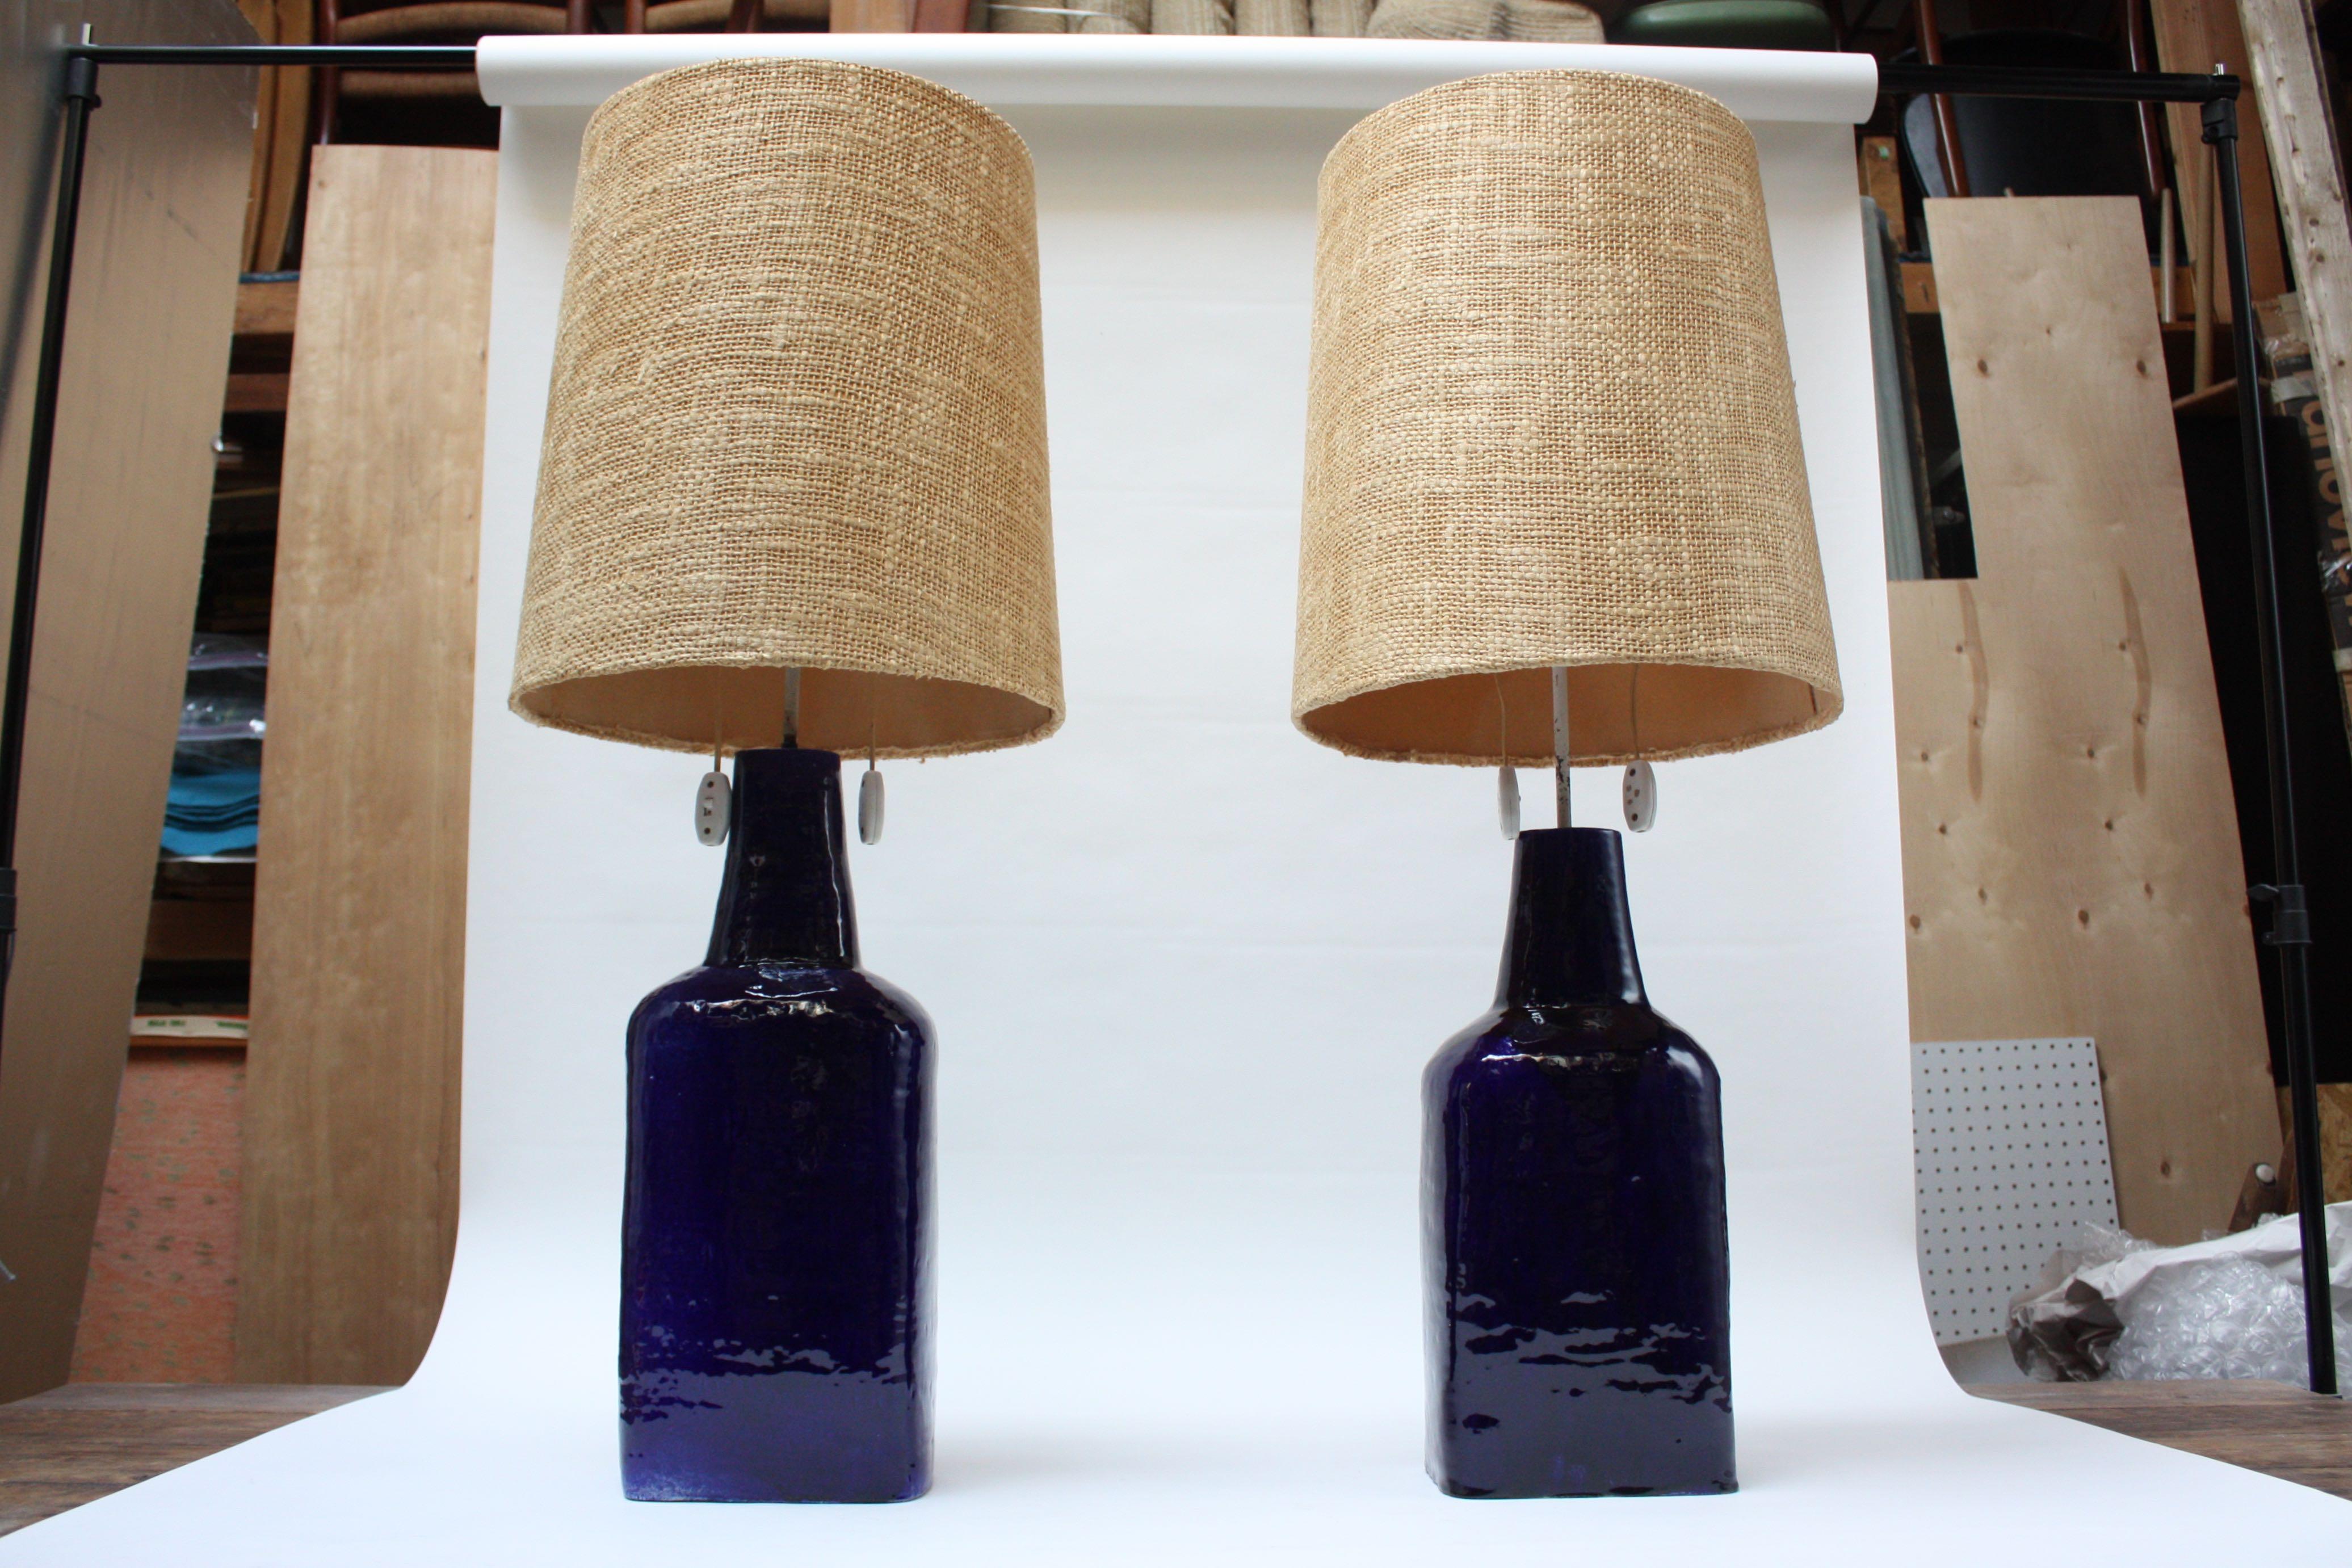 Exceptional and uncommon pair of large ceramic table lamps by the Swiss ceramicist, Mattli (circa 1960). Composed of terracotta bases with a high-gloss indigo glaze. Features dual sockets and large conical diffusers with two switches / lamp to